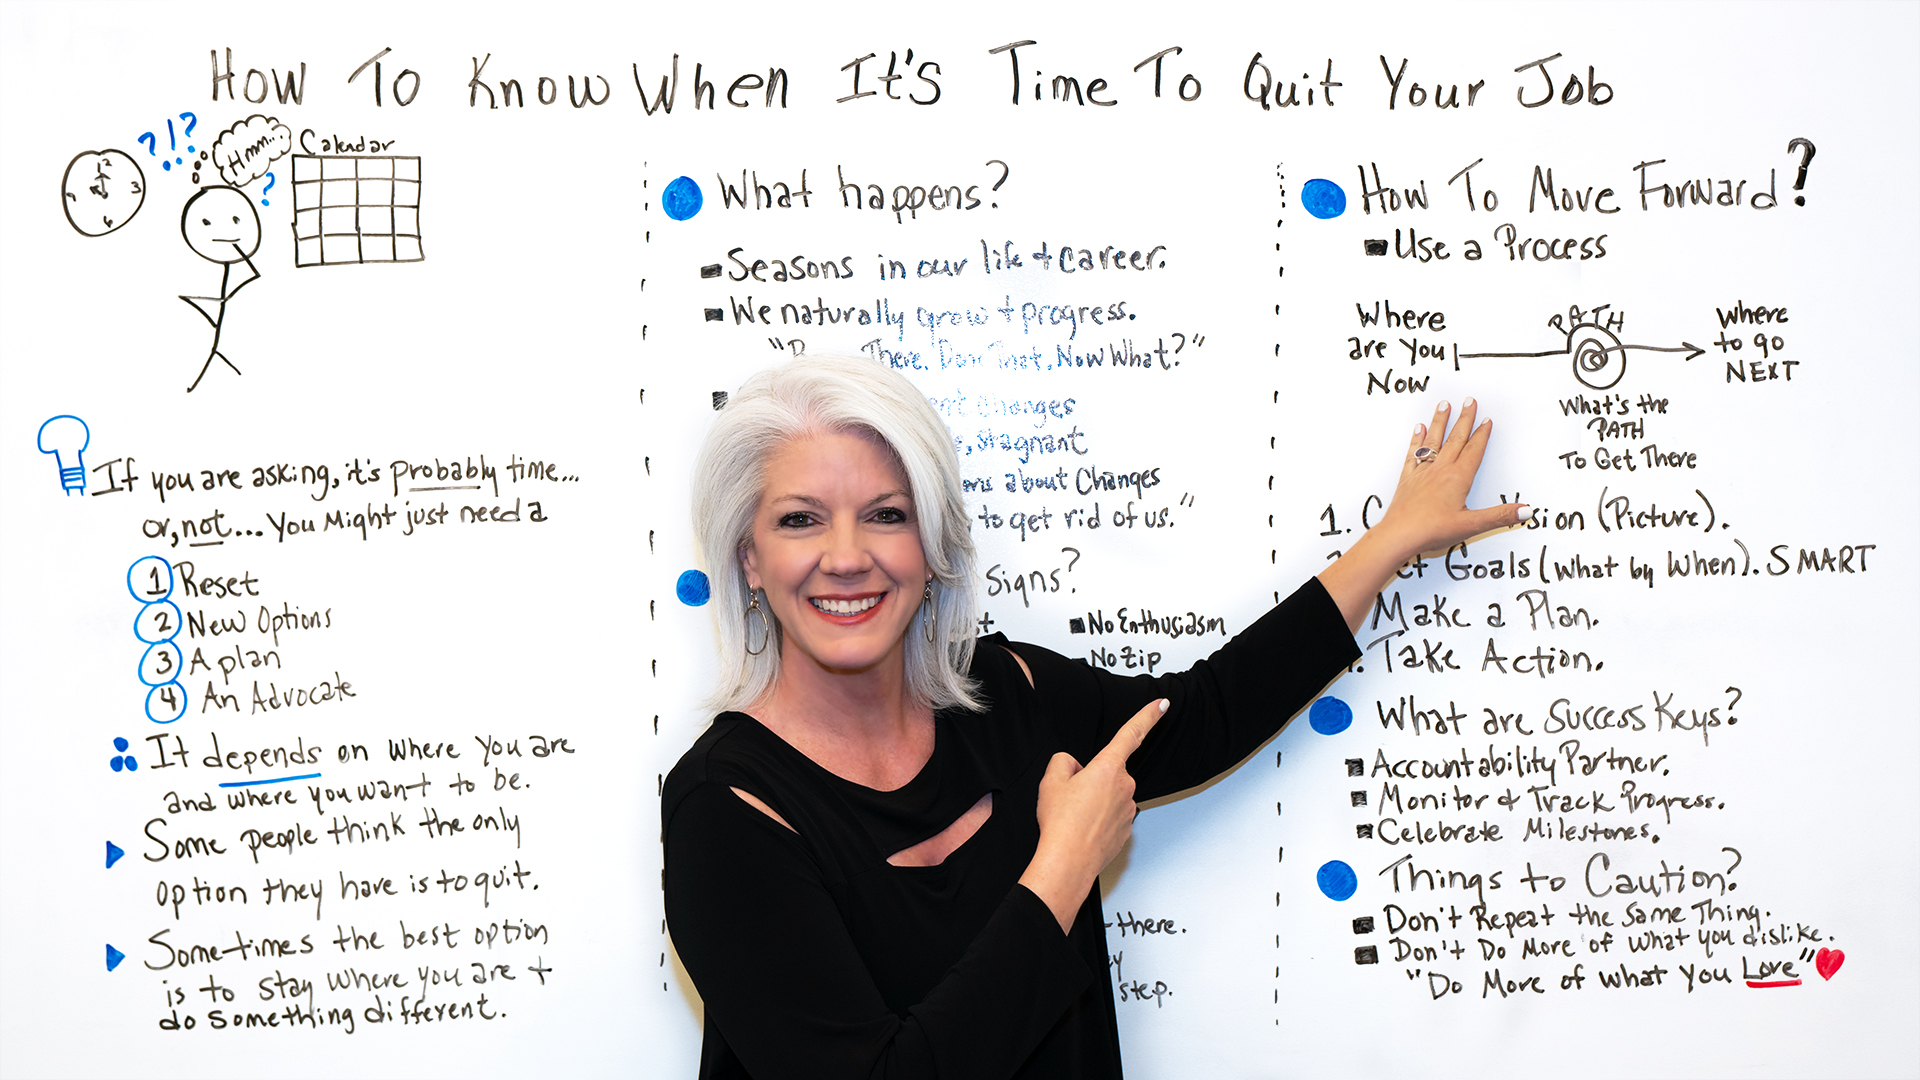 How to know when its time to quit your job